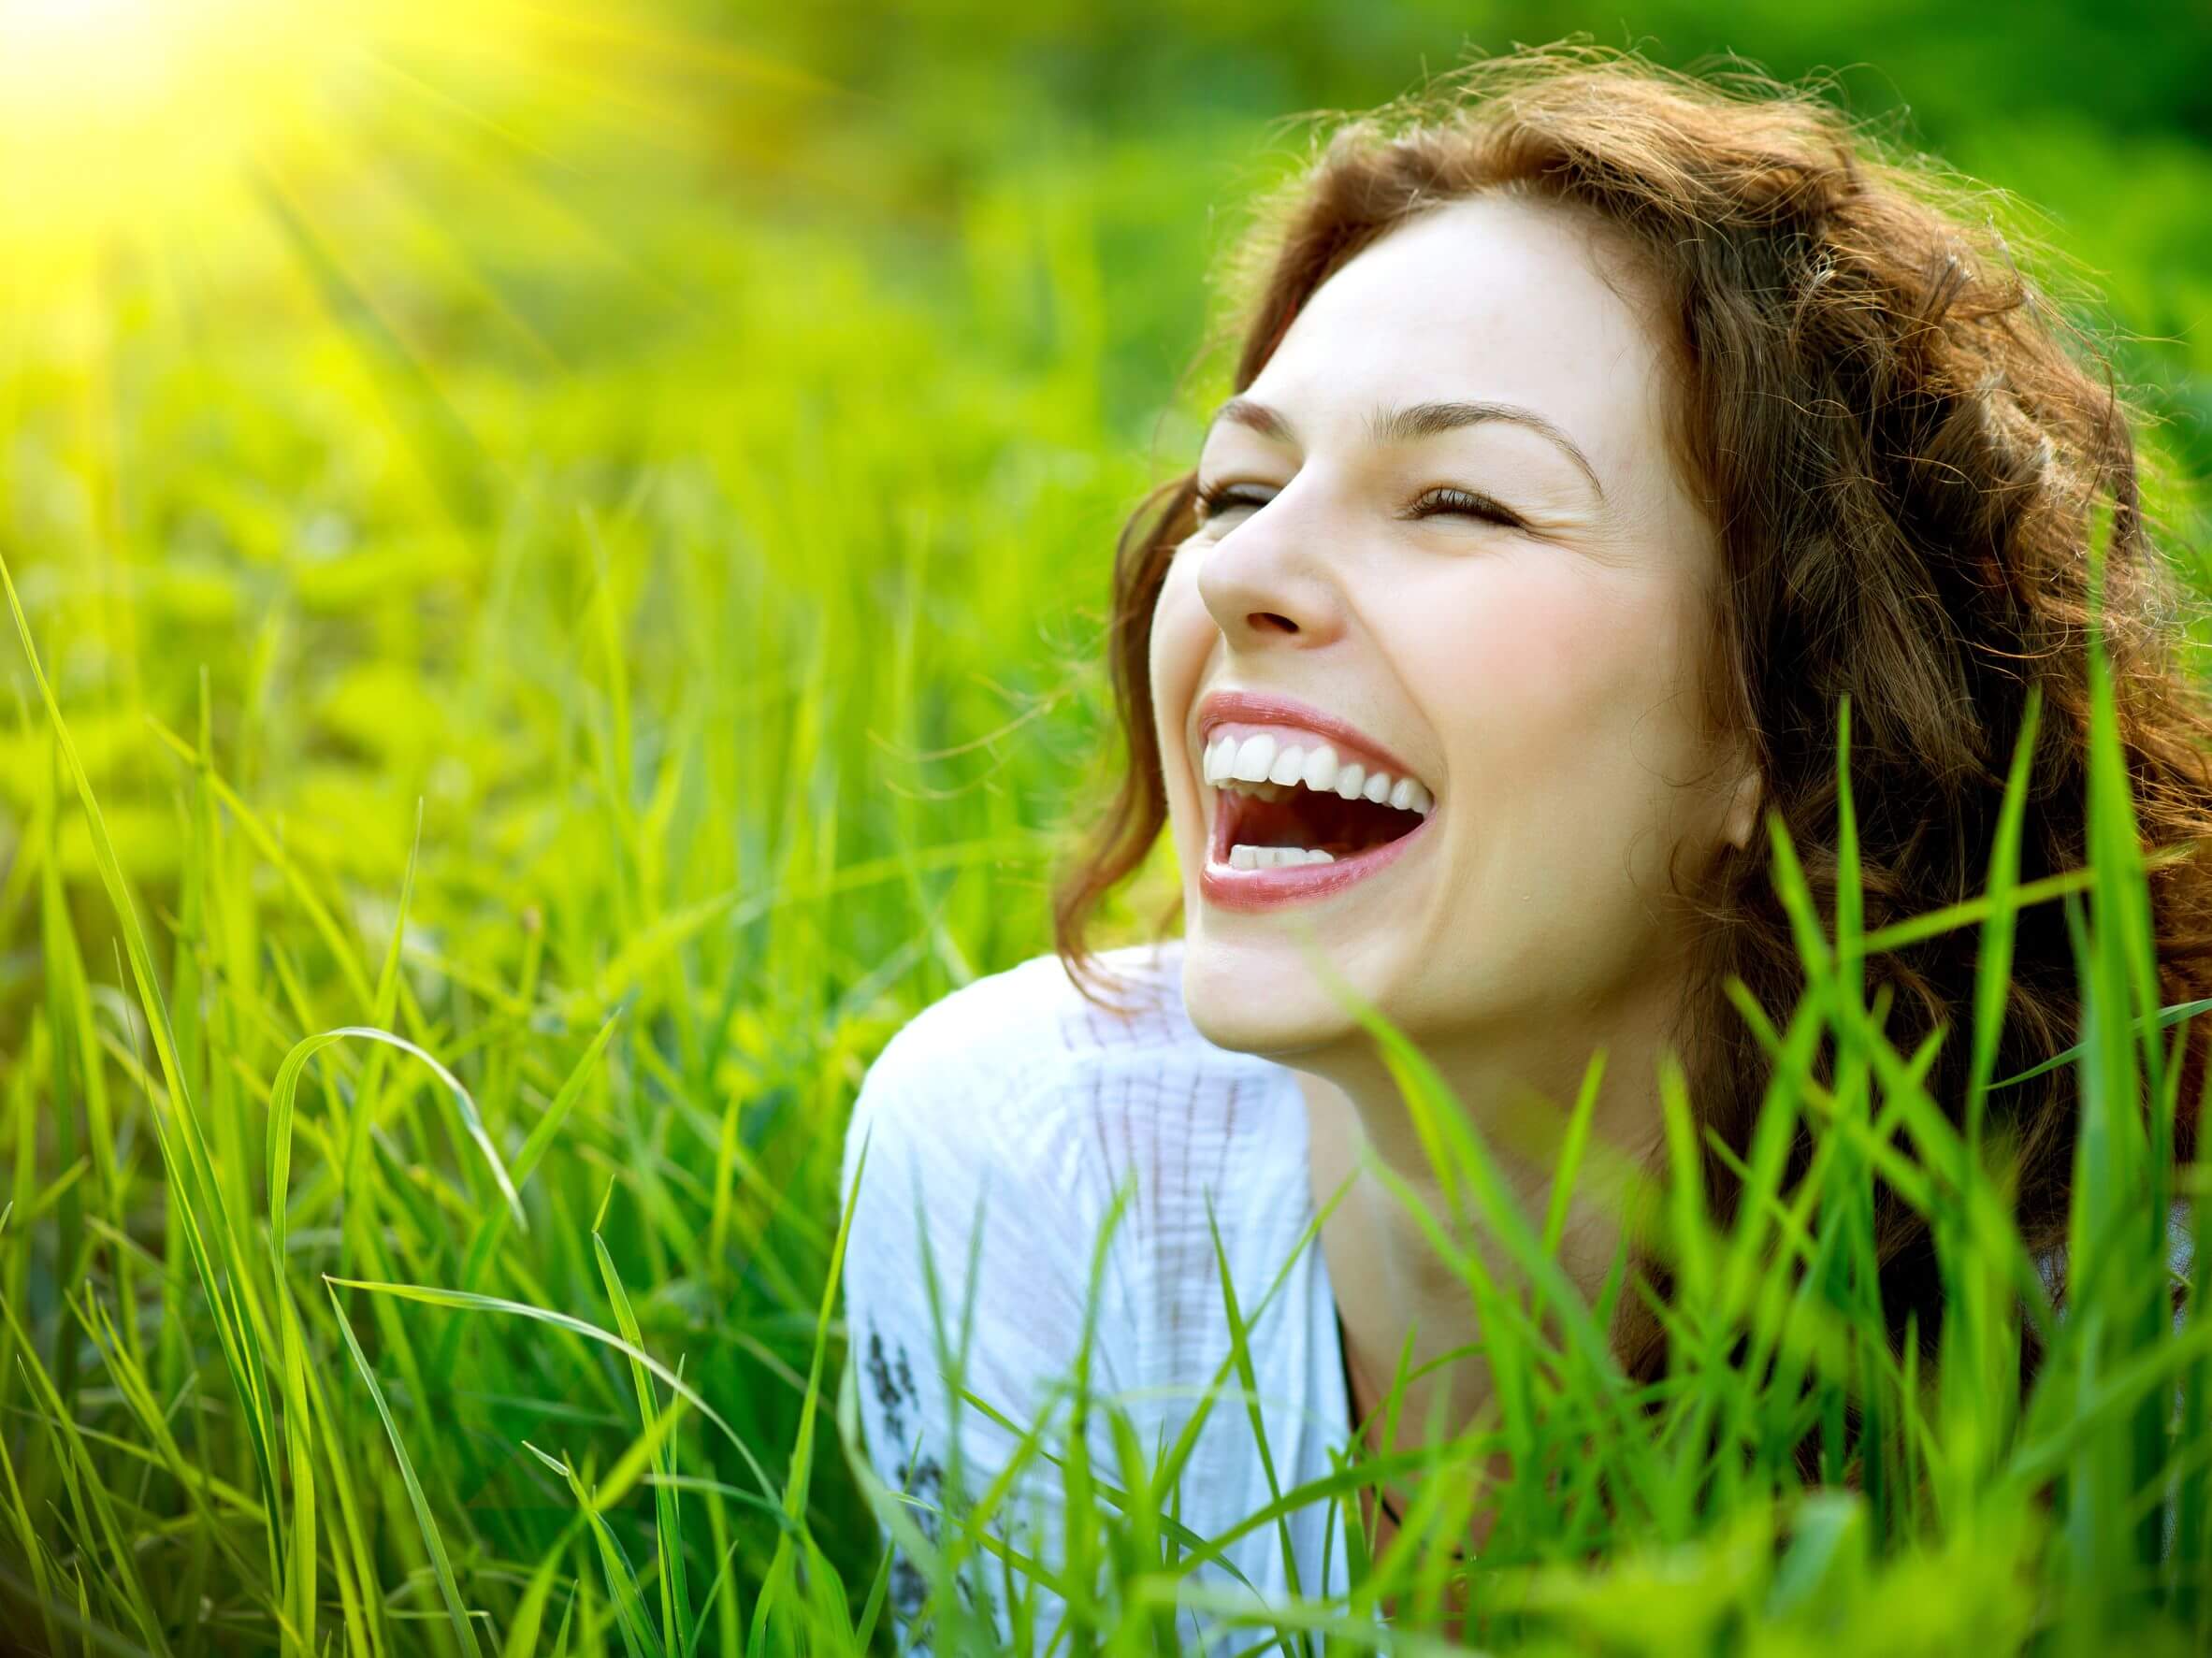 A woman sitting in a field laughing.